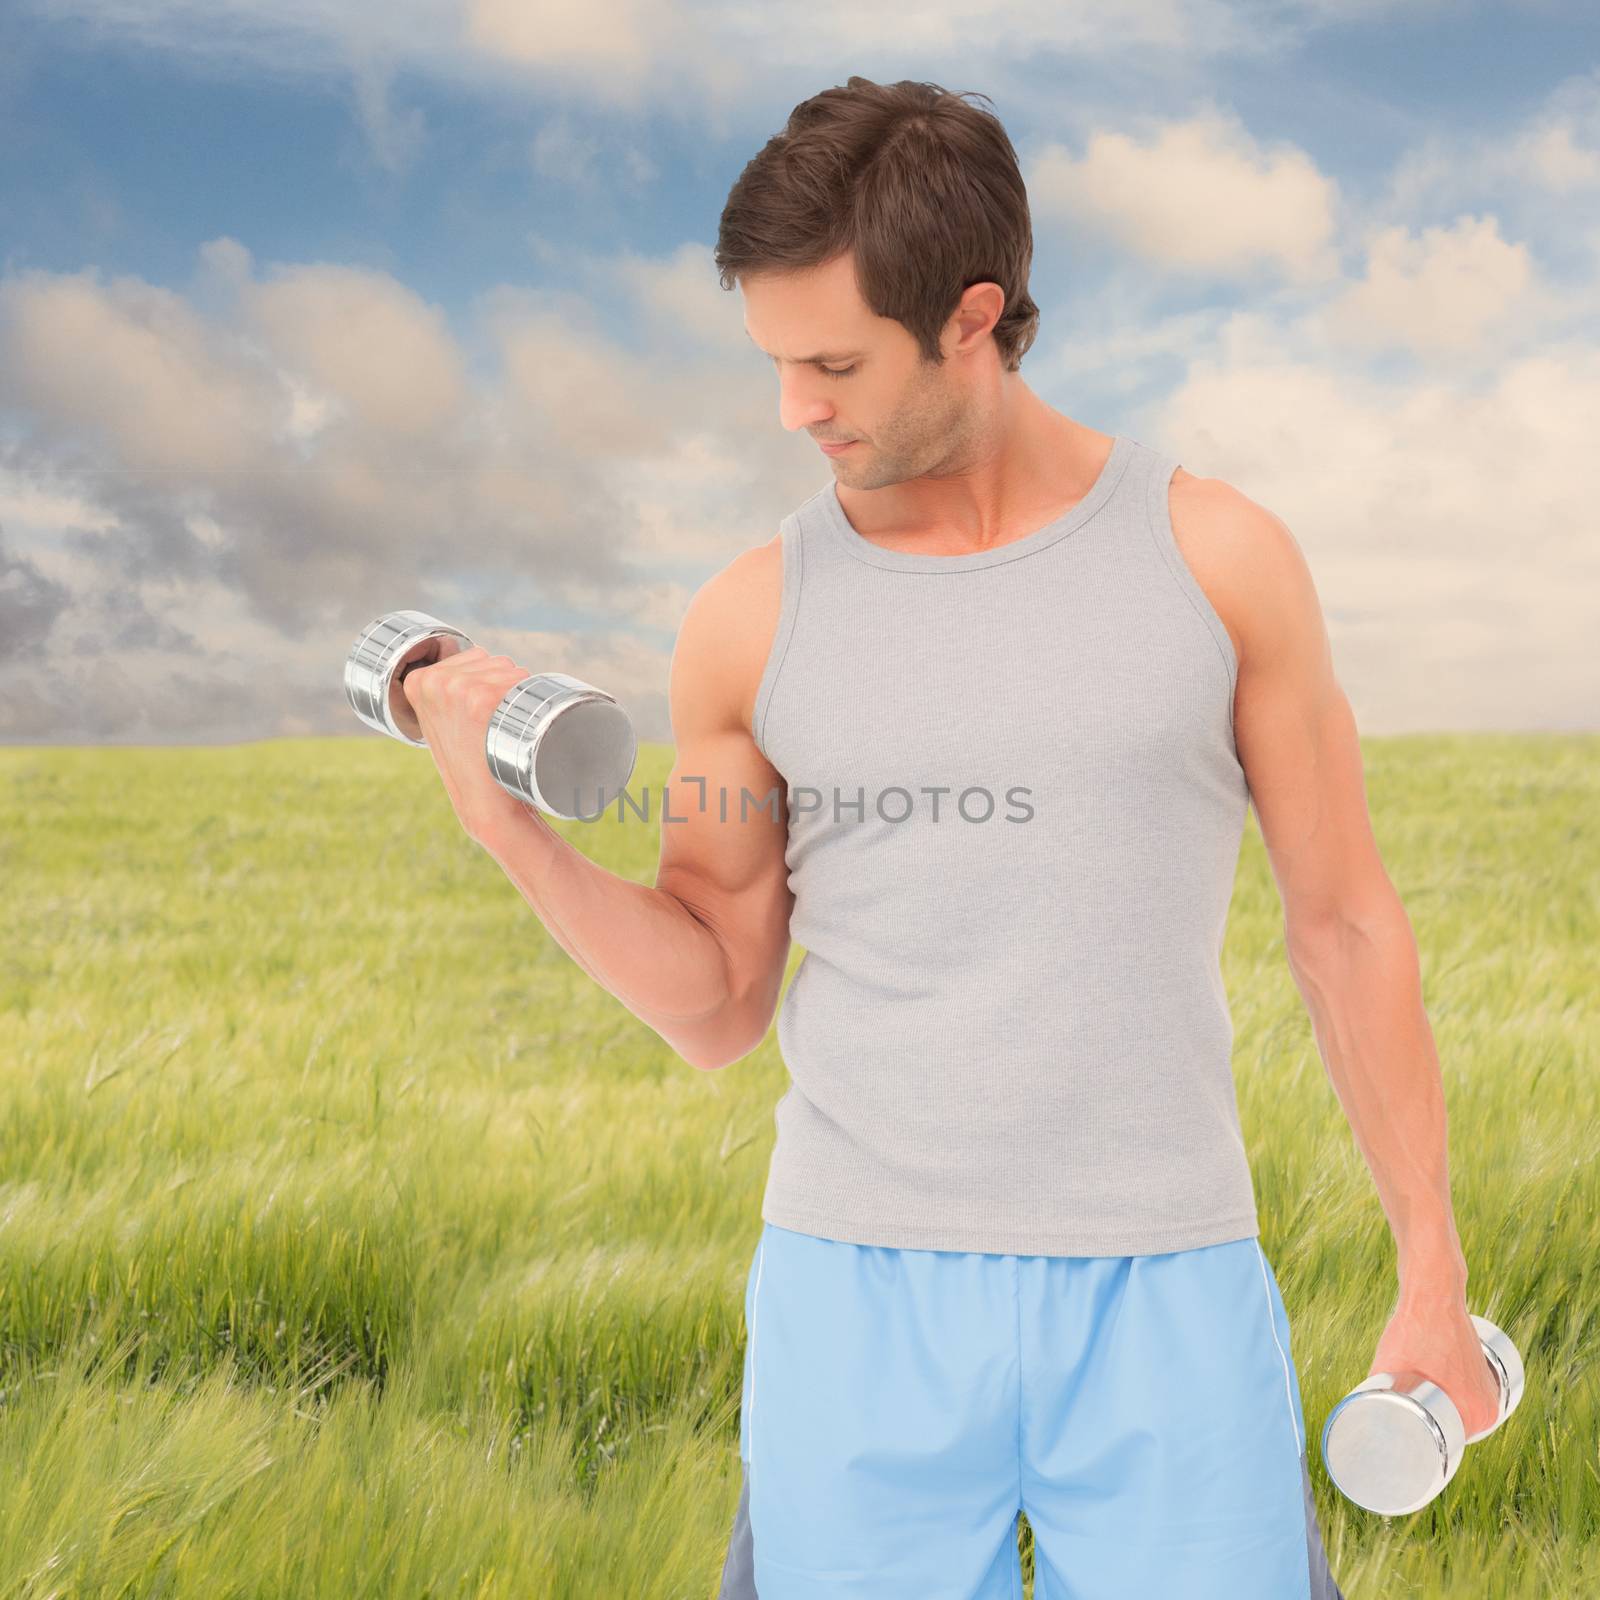 Fit young man exercising with dumbbells against nature scene